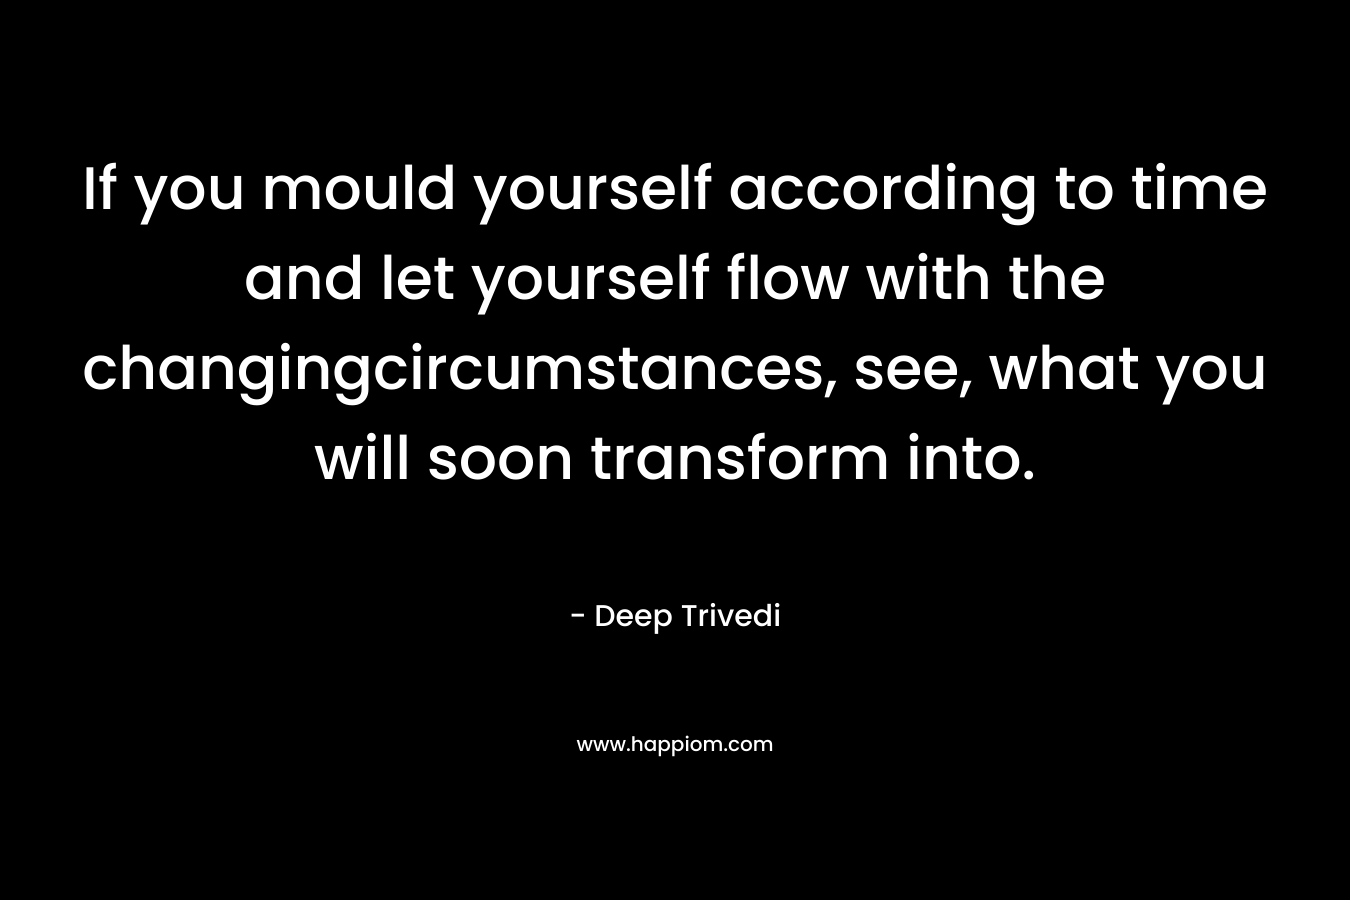 If you mould yourself according to time and let yourself flow with the changingcircumstances, see, what you will soon transform into.